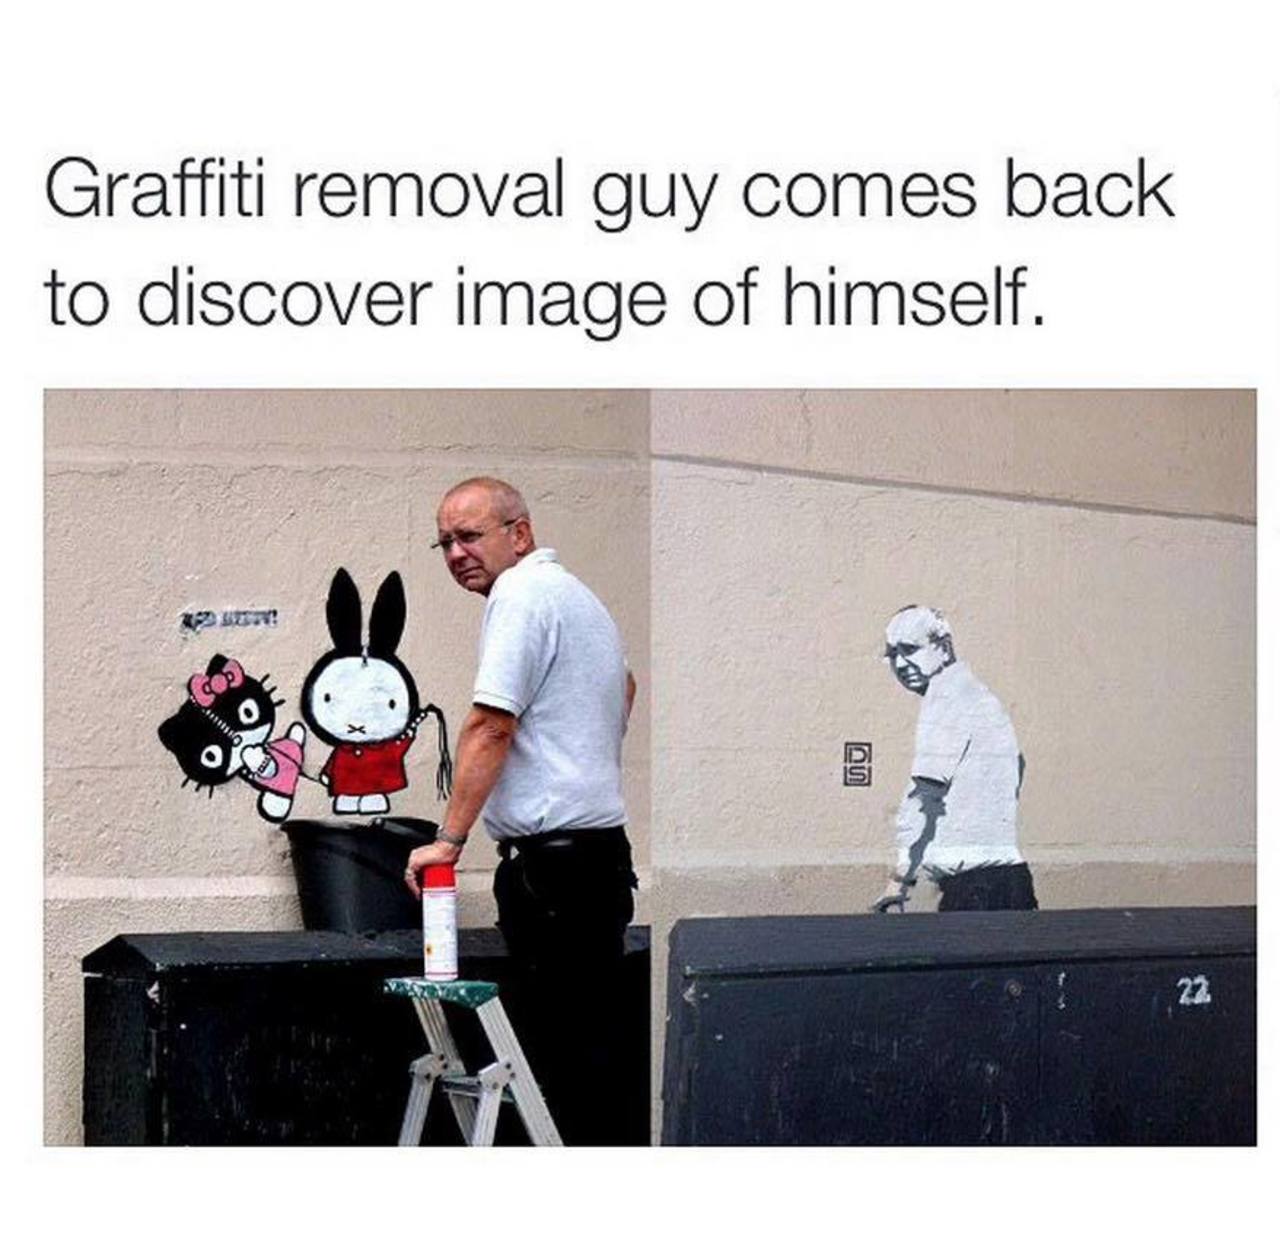 RT @BoyfromtheCrowd: This si so cool...Graffiti removal man comes back to find a graffiti of himself, #graffiti #streetart http://t.co/iYUtBoAwuw